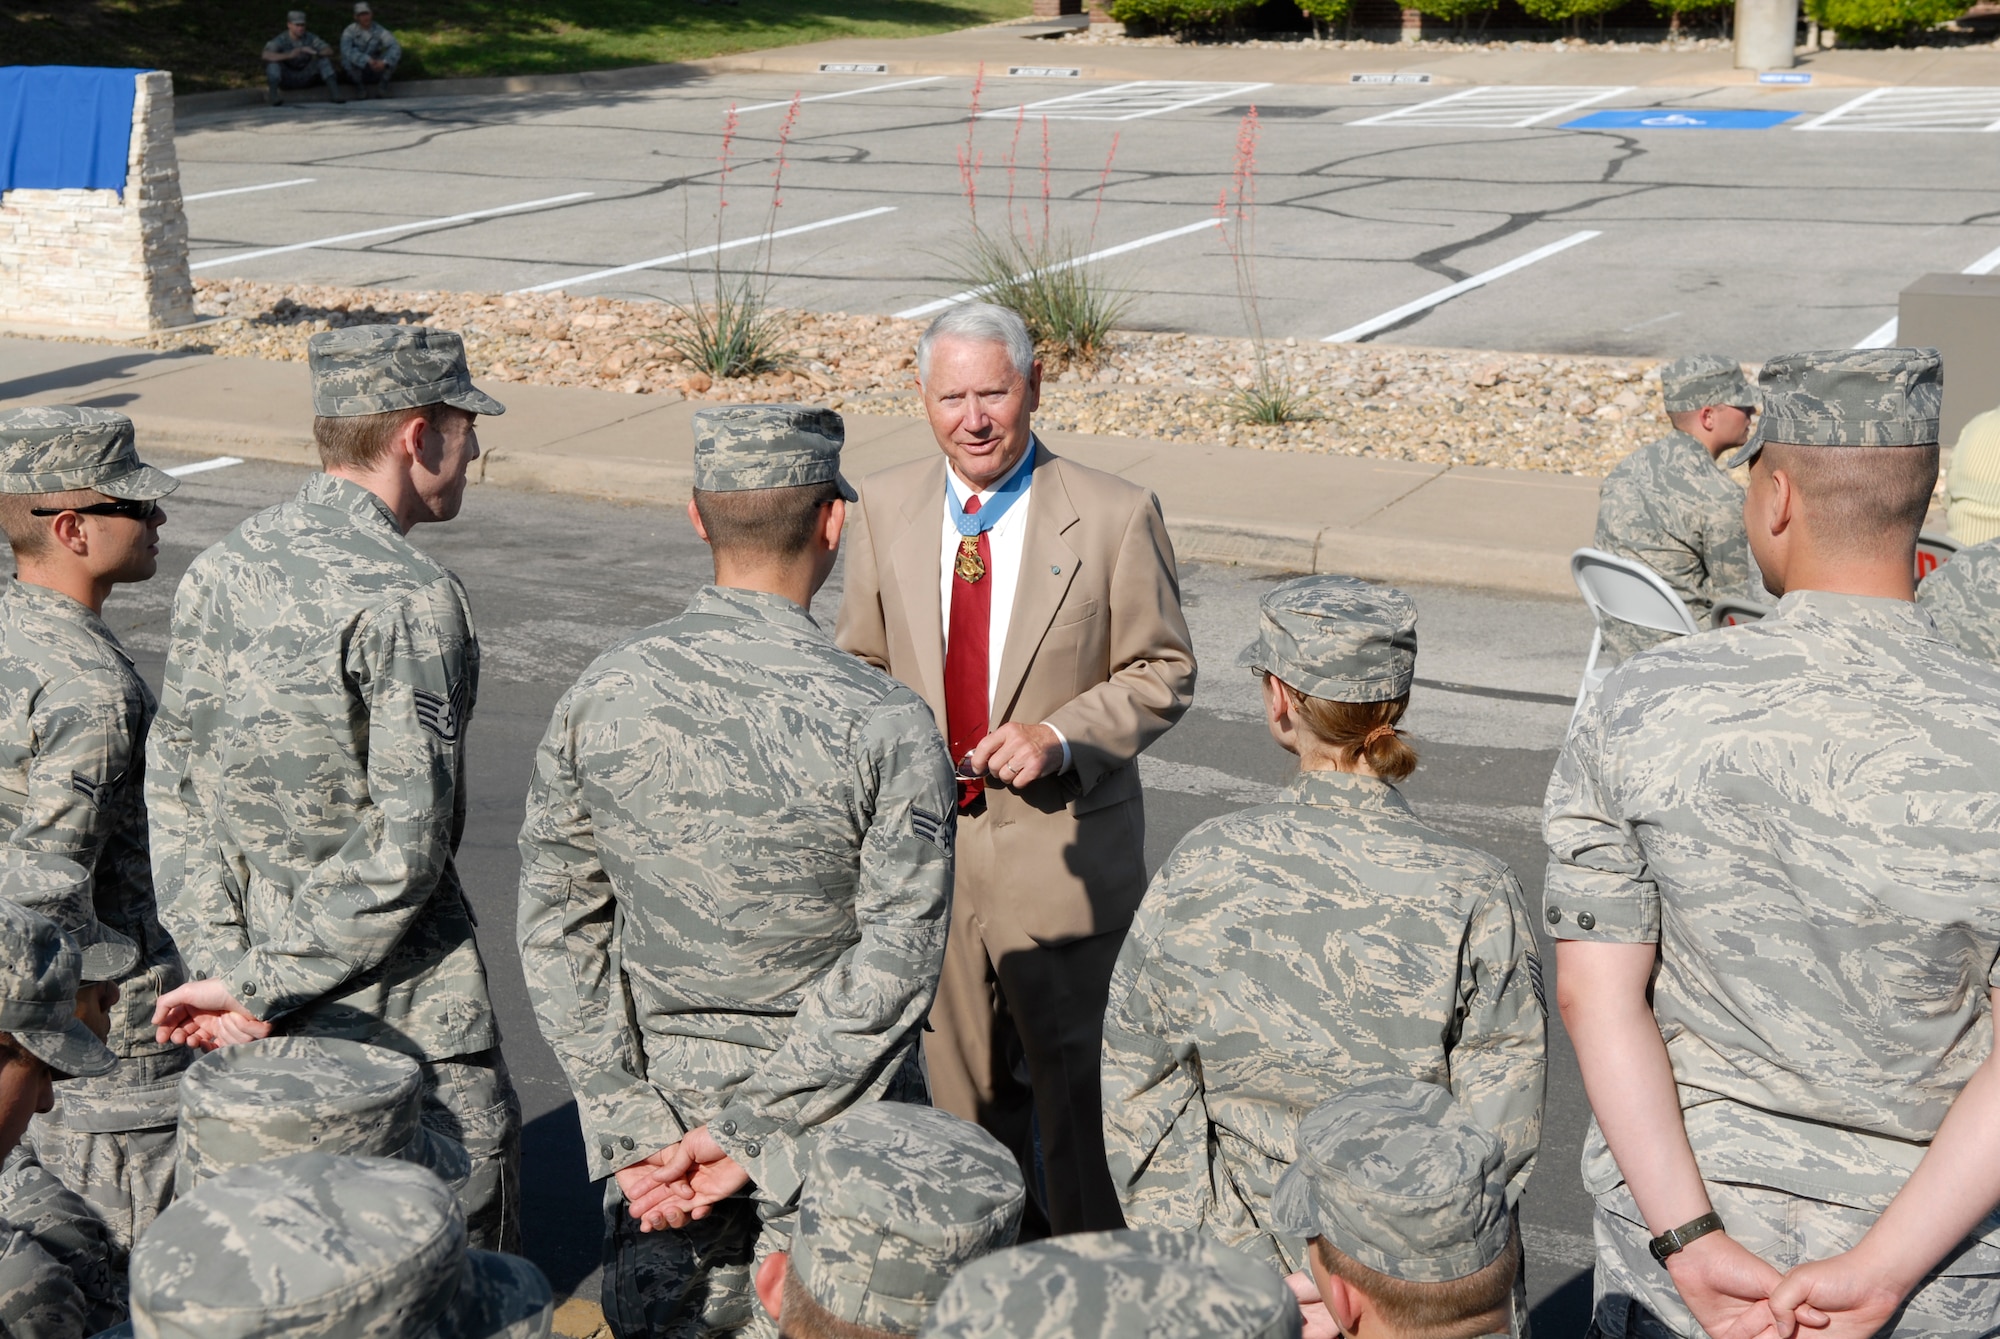 GOODFELLOW AIR FORCE BASE, Texas – Retired Col. Leo K. Thorsness, Medal of Honor recipient, speaks with Goodfellow Airmen, May 7,2010. Two Visiting Officer Quarters were named in honor of retired Colonels Thorsness and George E. “Bud” Day, both of whom received the Medal of Honor for actions while serving in Vietnam. (U.S. Air Force photo/Lou Czarnecki)